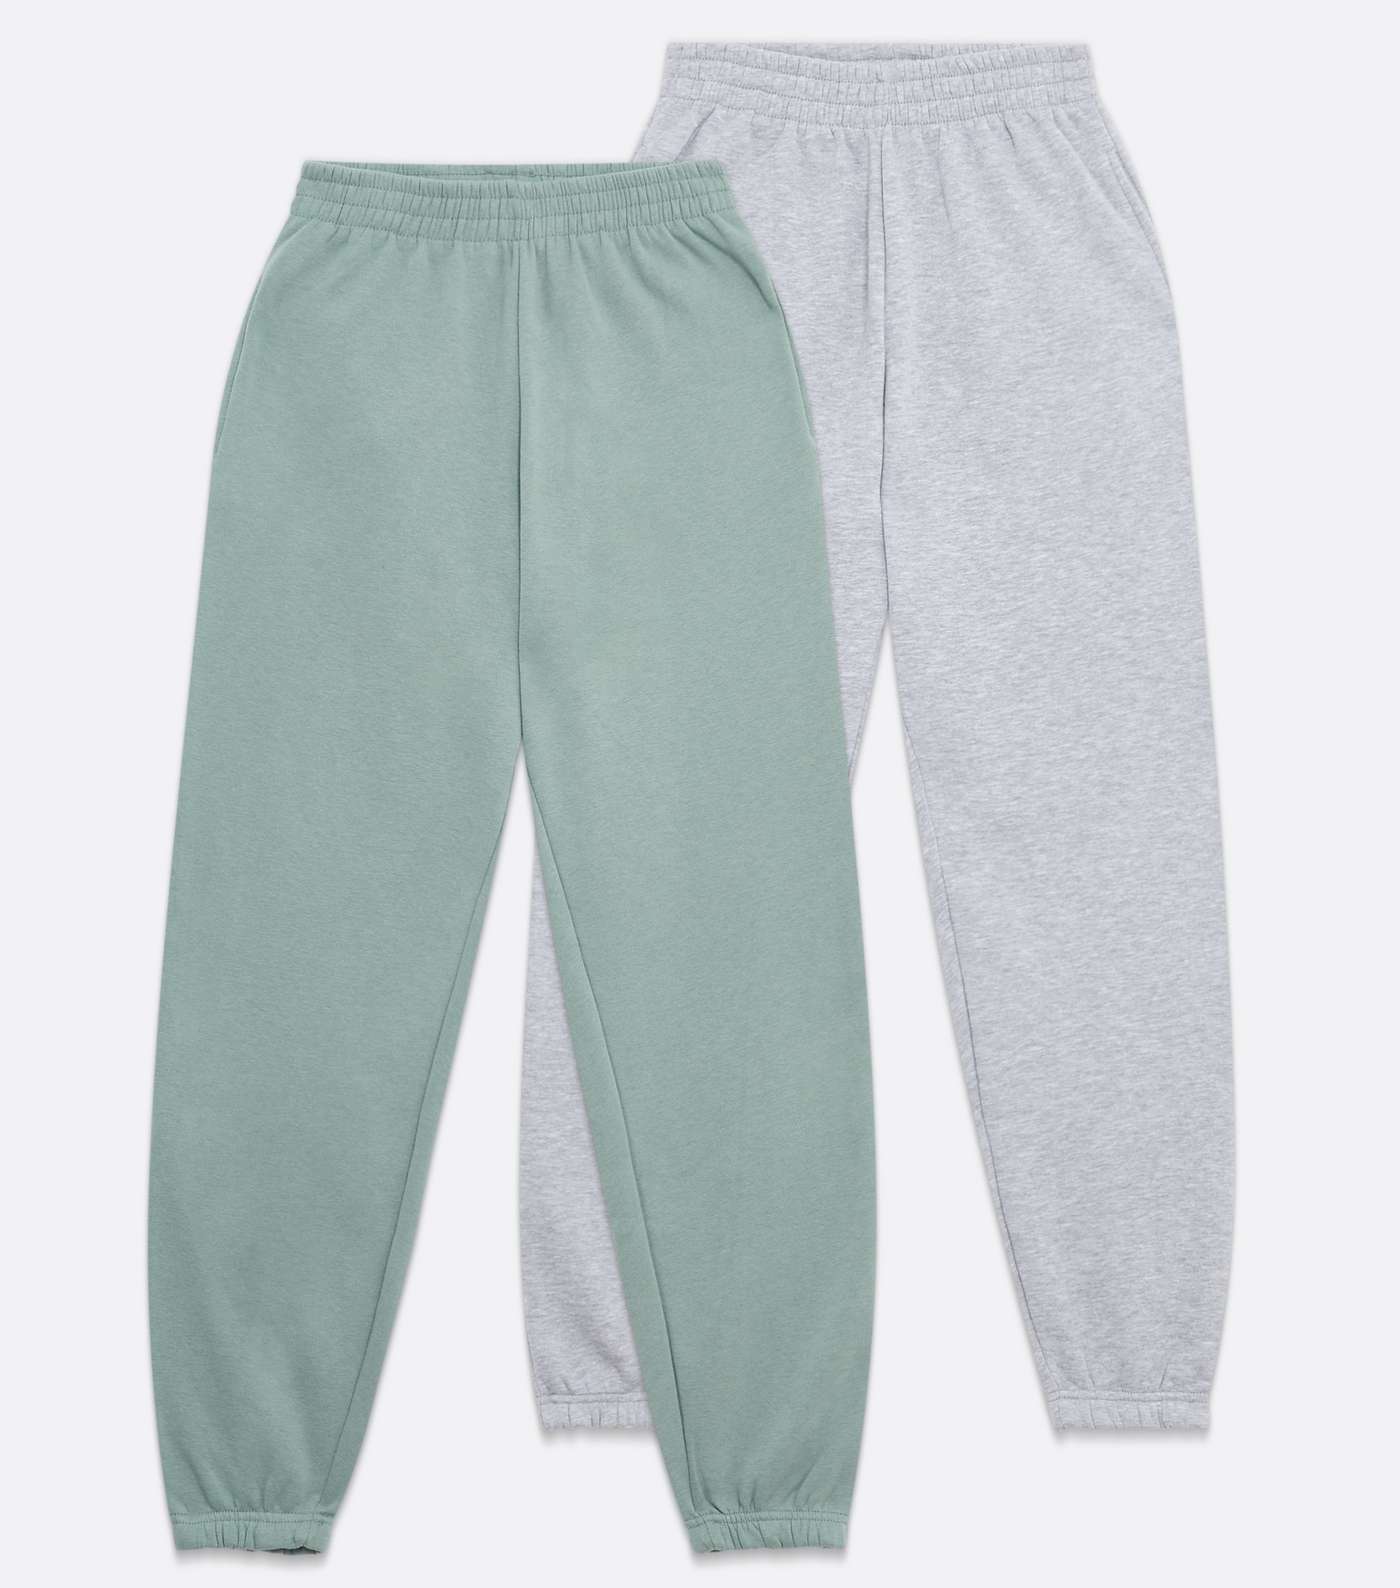 Girls 2 Pack Light Green and Grey Cuffed Joggers Image 5